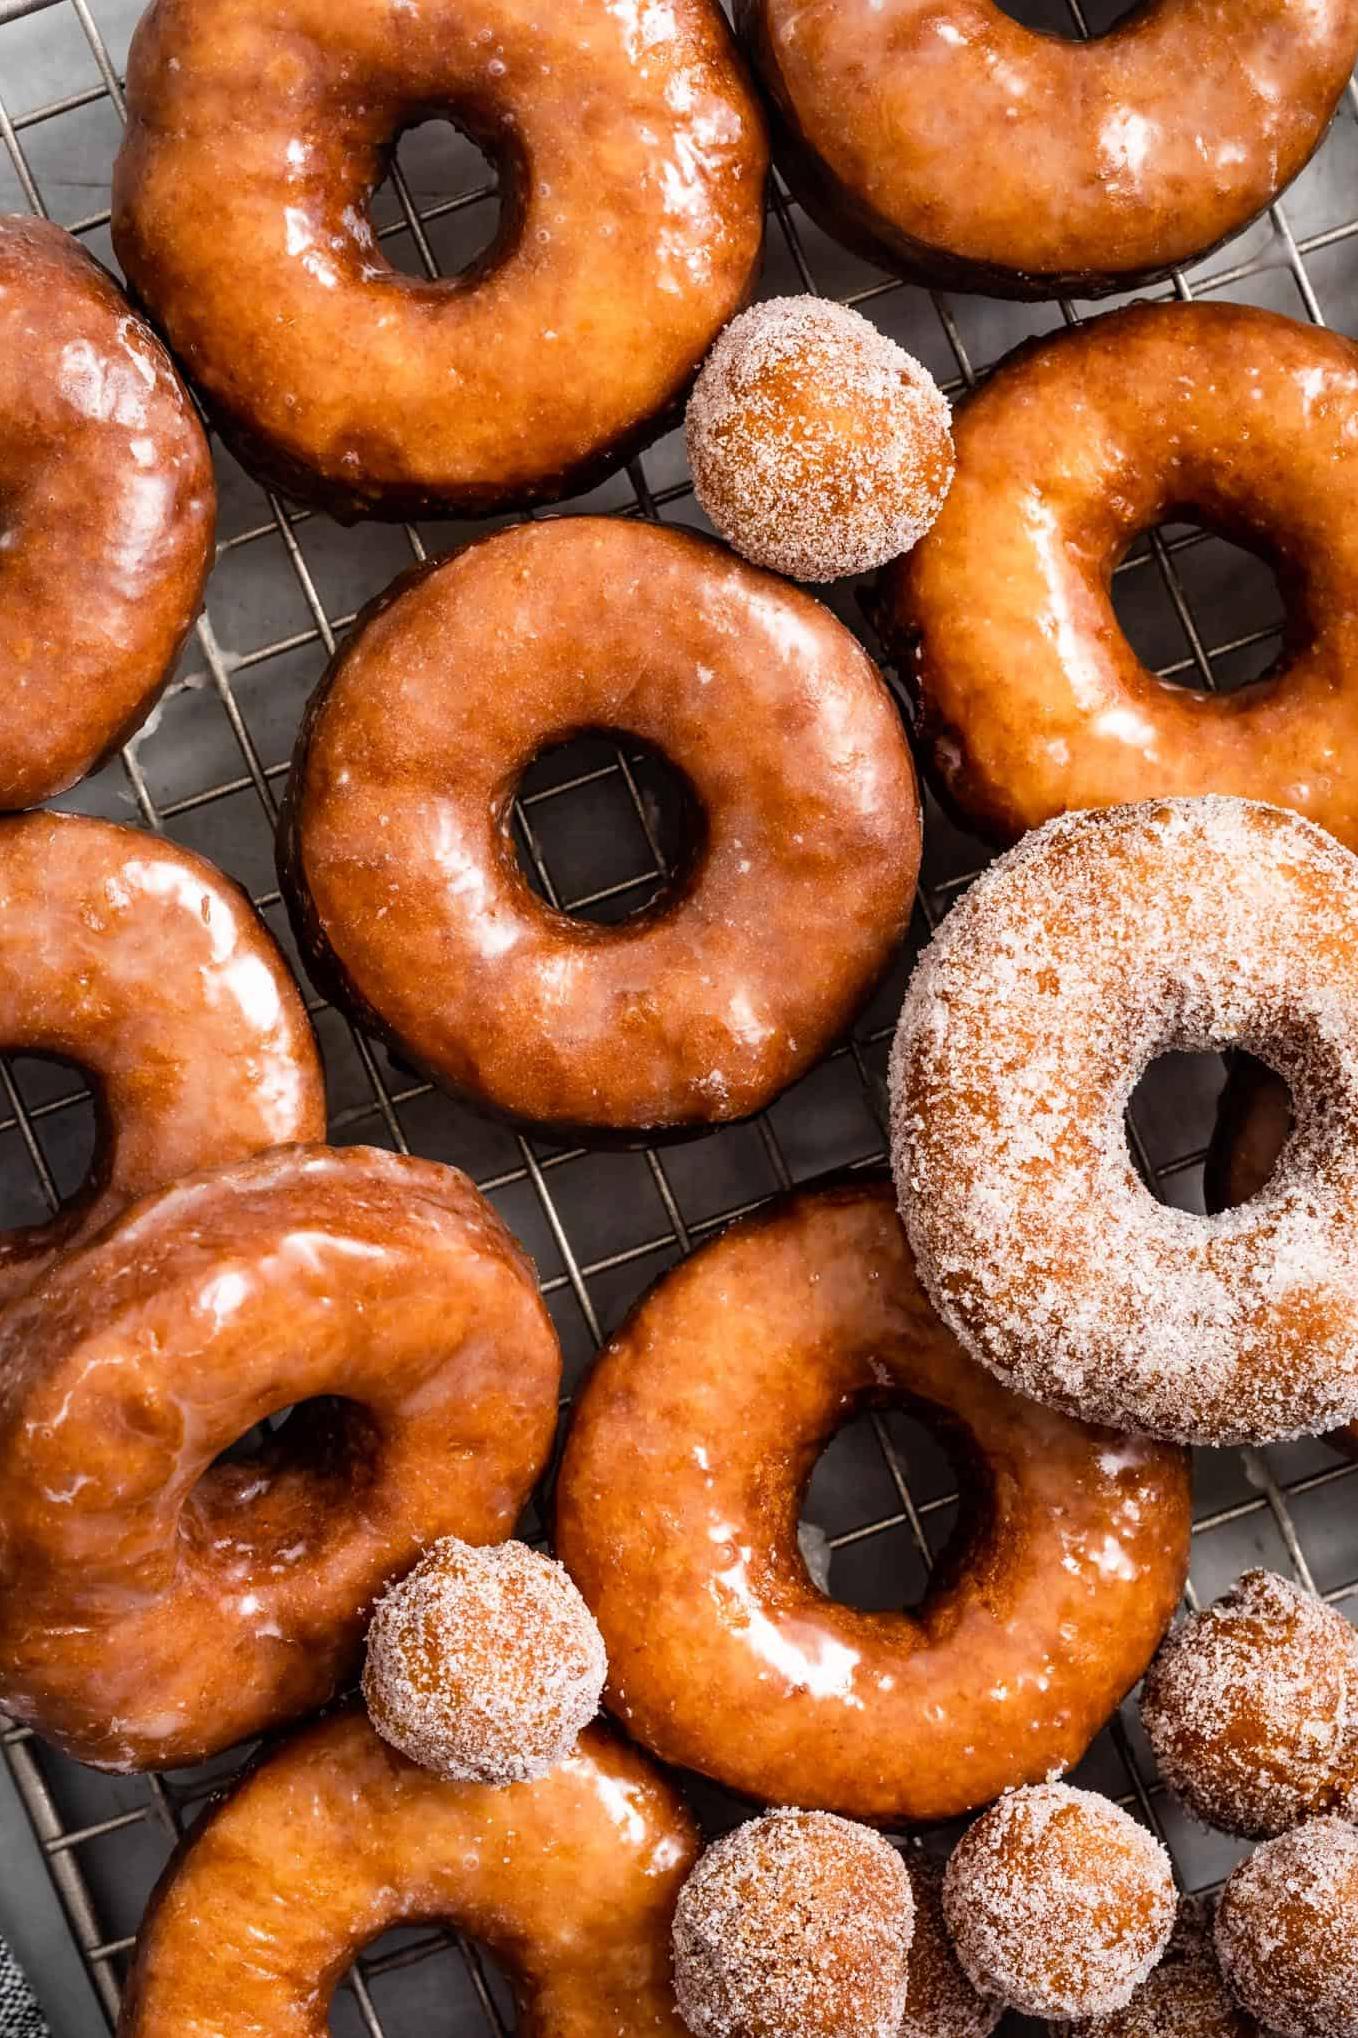  These donut drops may be gluten-free, but they're full of flavor!